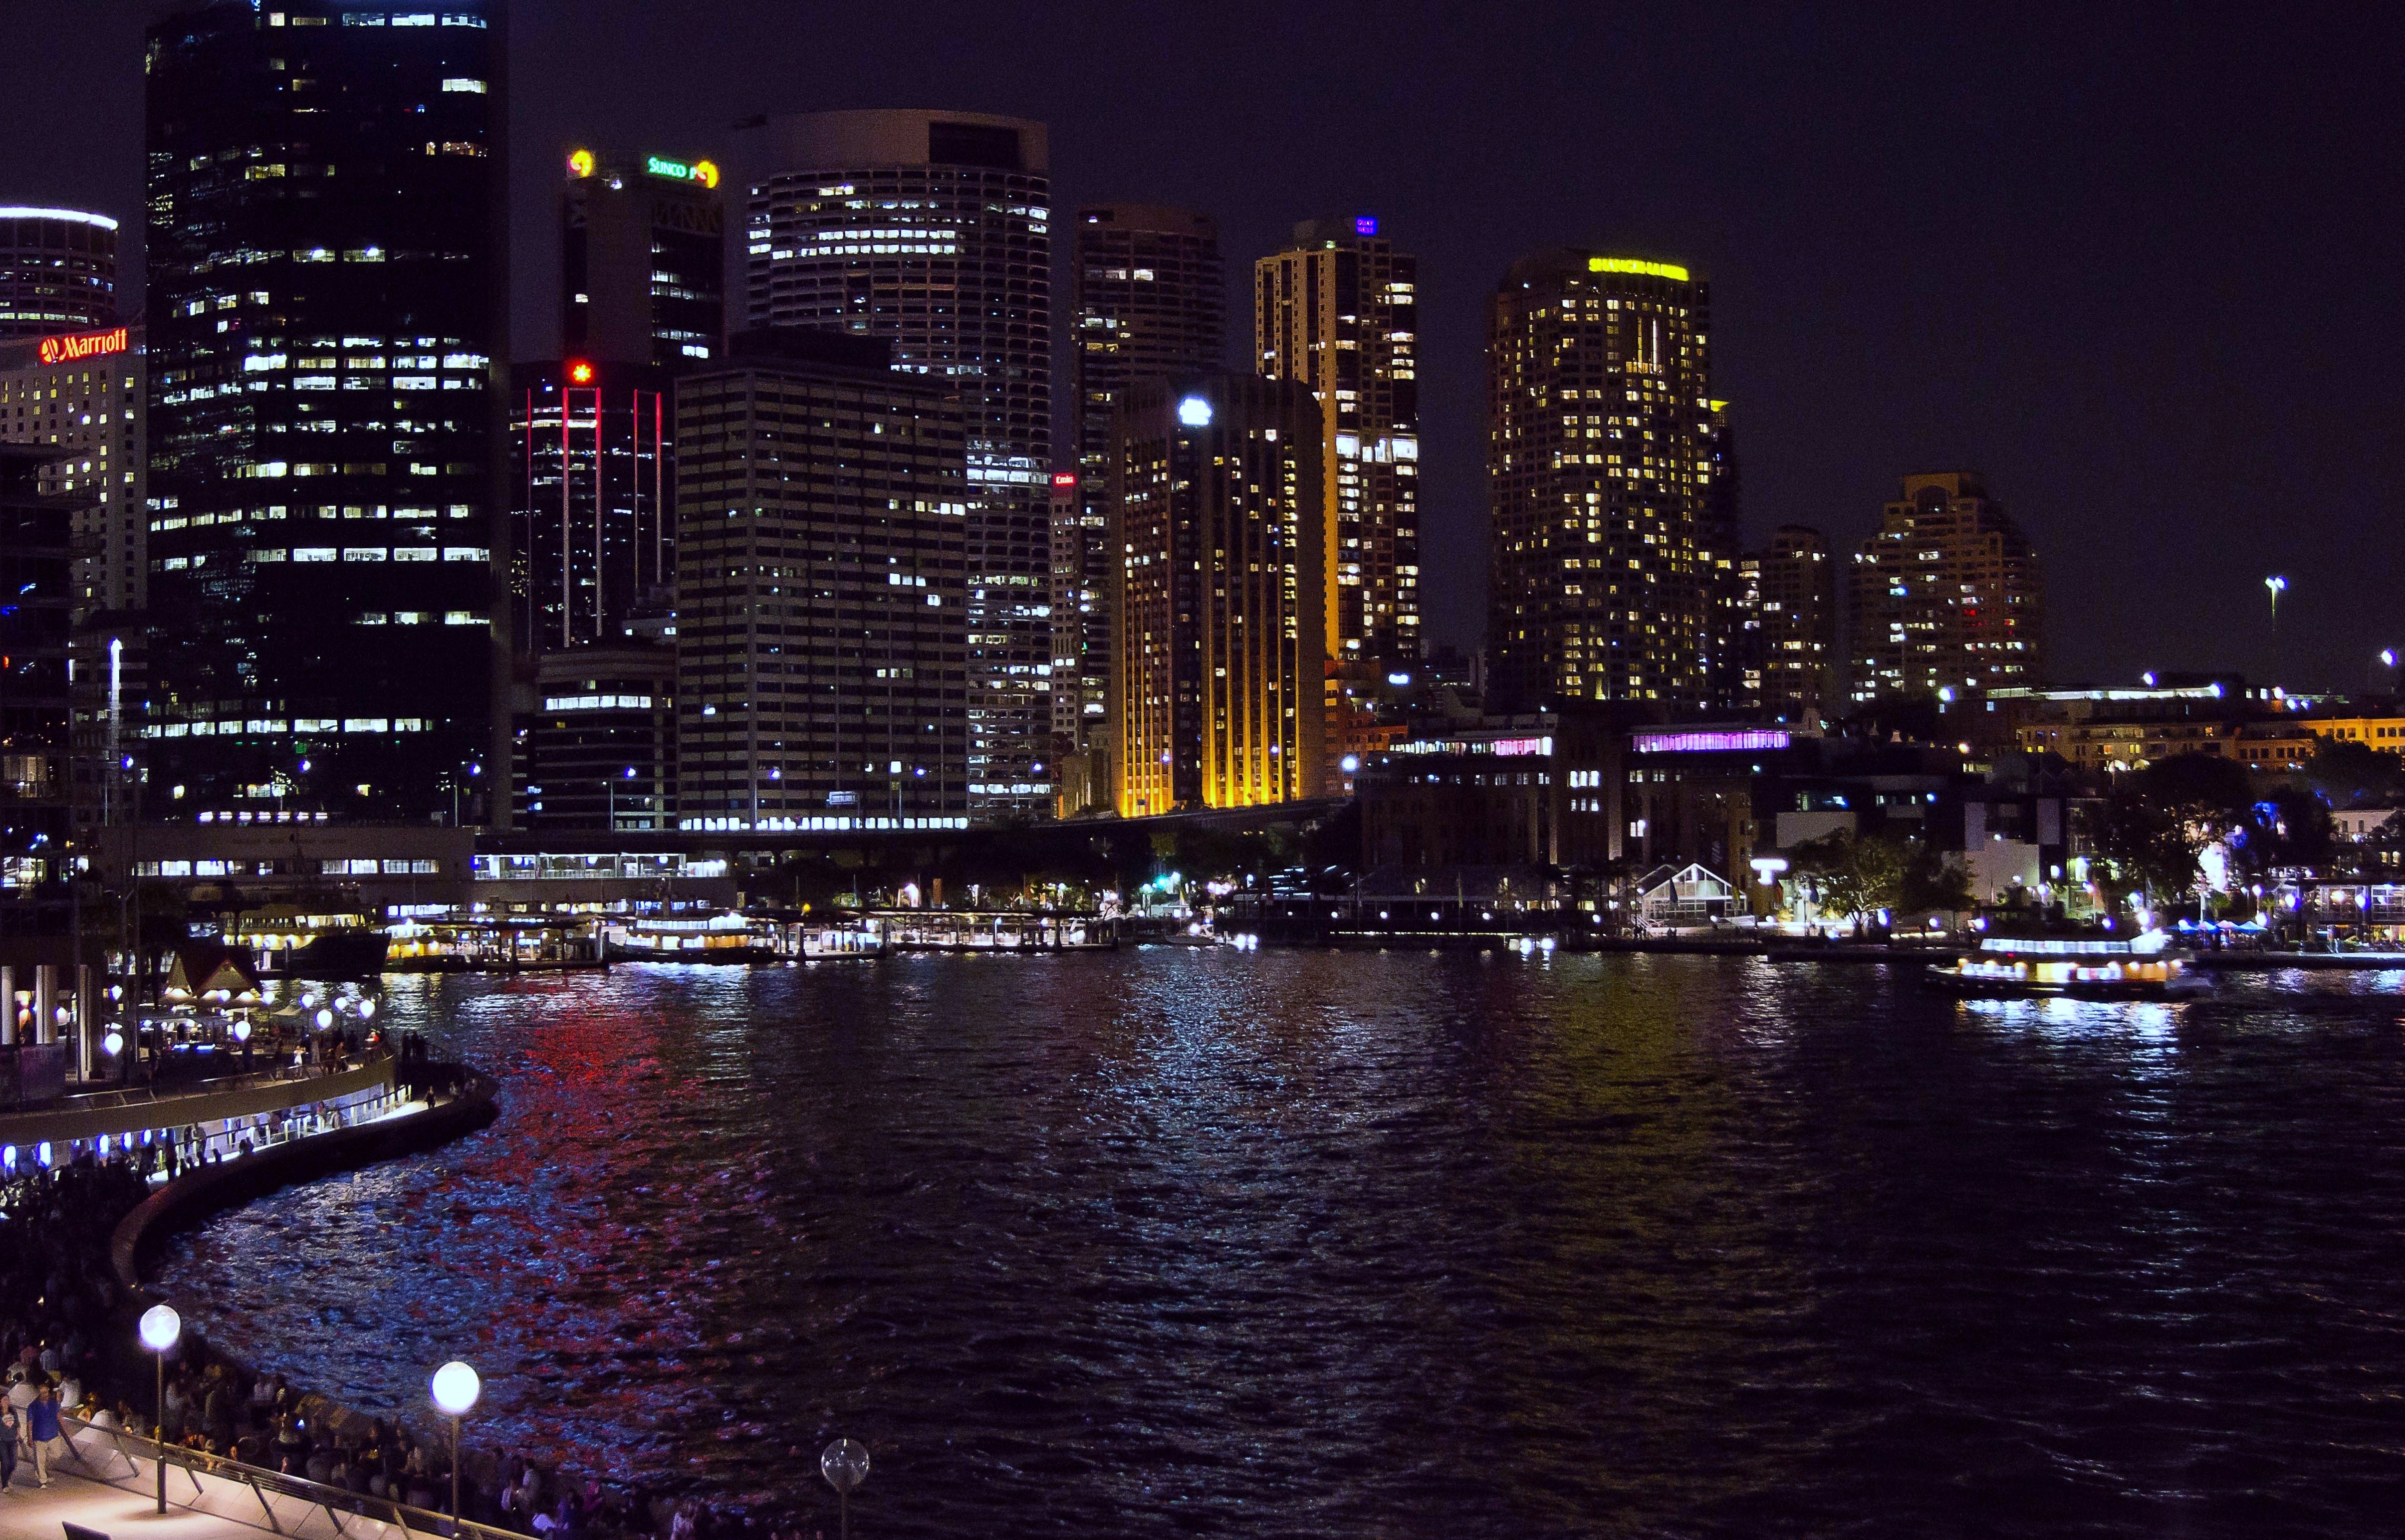 139483 download wallpaper cities, night, sydney, australia screensavers and pictures for free